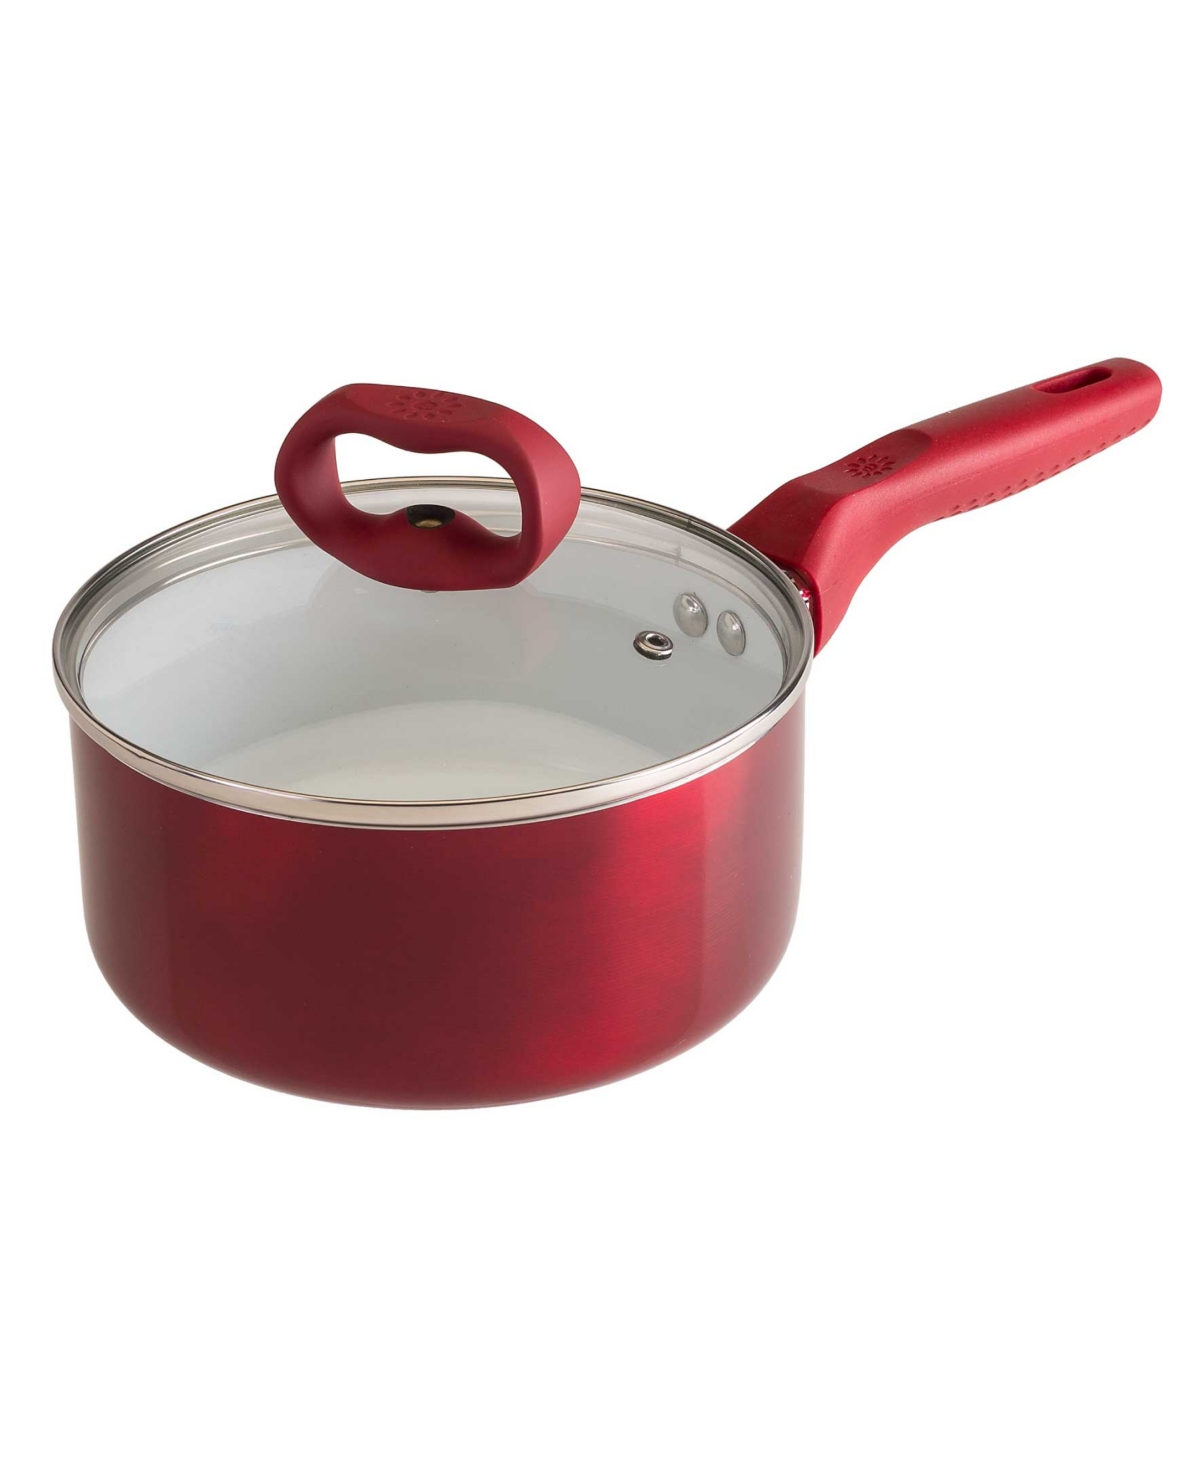 Ecolution Aluminum 2 Quart Bliss Non-stick Saucepan With Glass Lid In Red